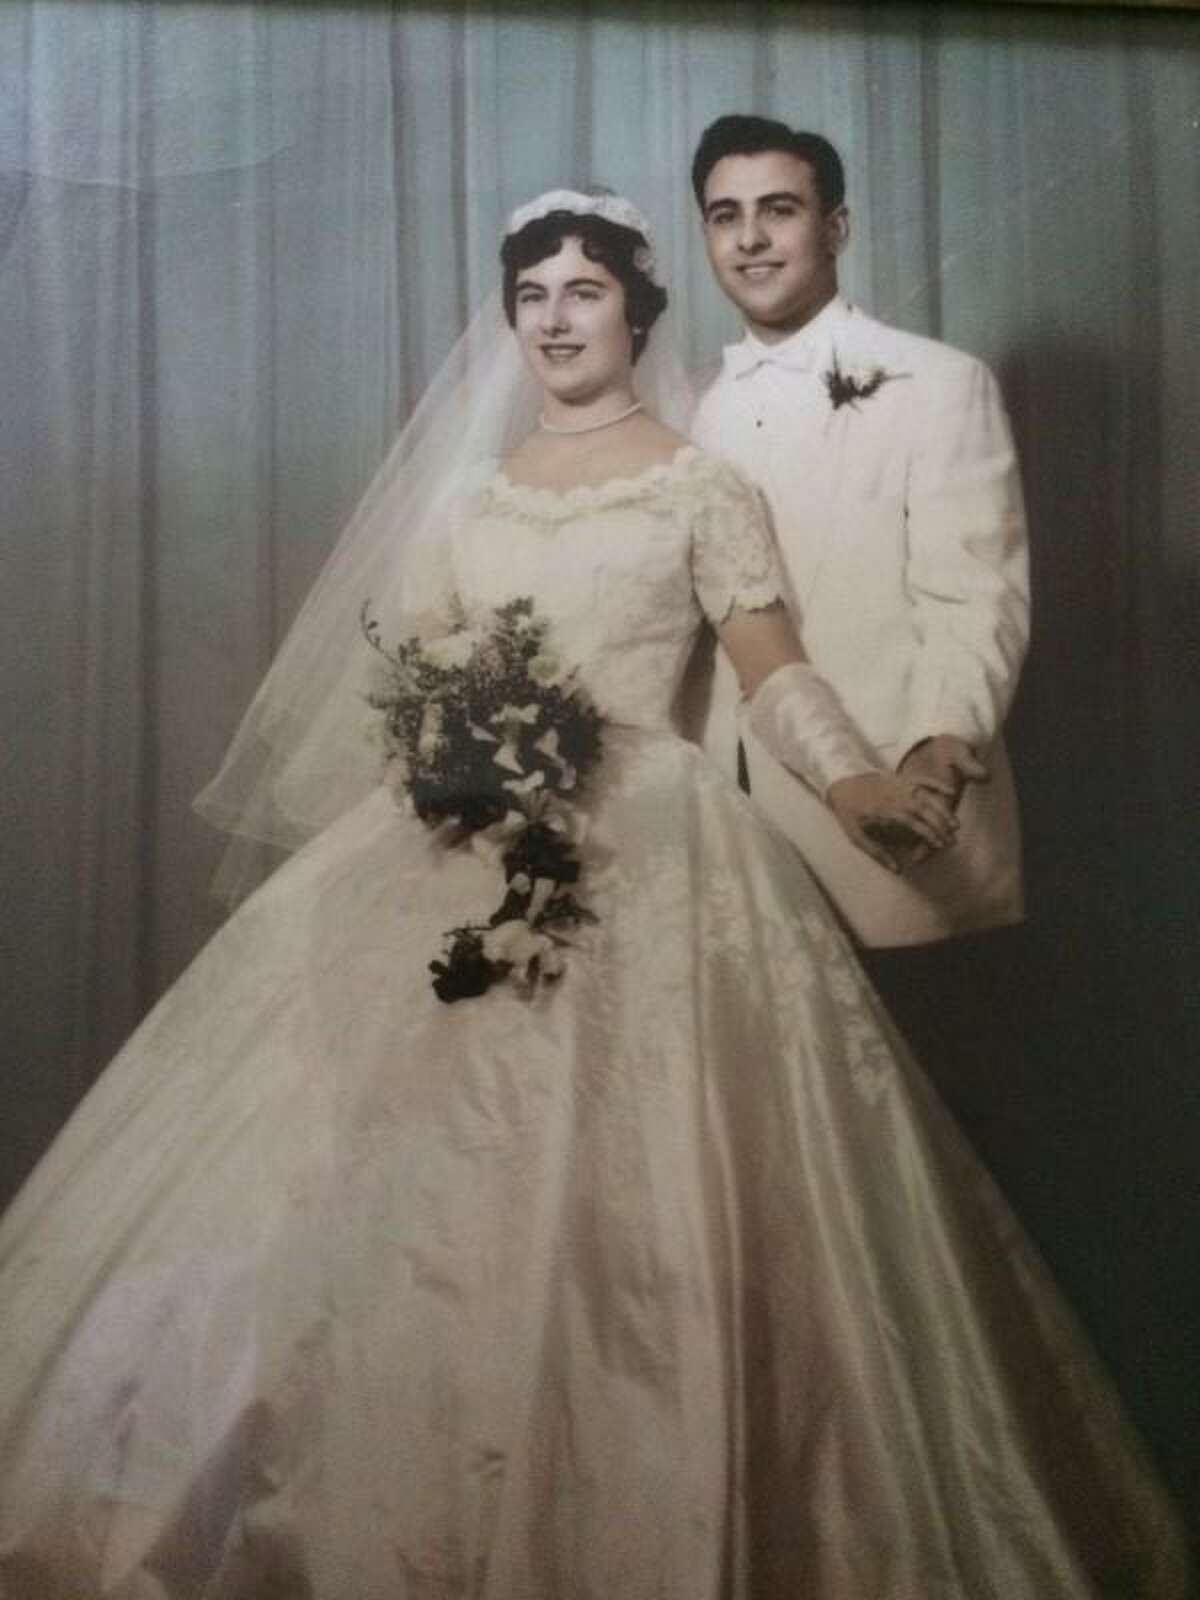 Loretta and Vincent Tangredi recently celebrated their 60th wedding anniversary on Sunday.